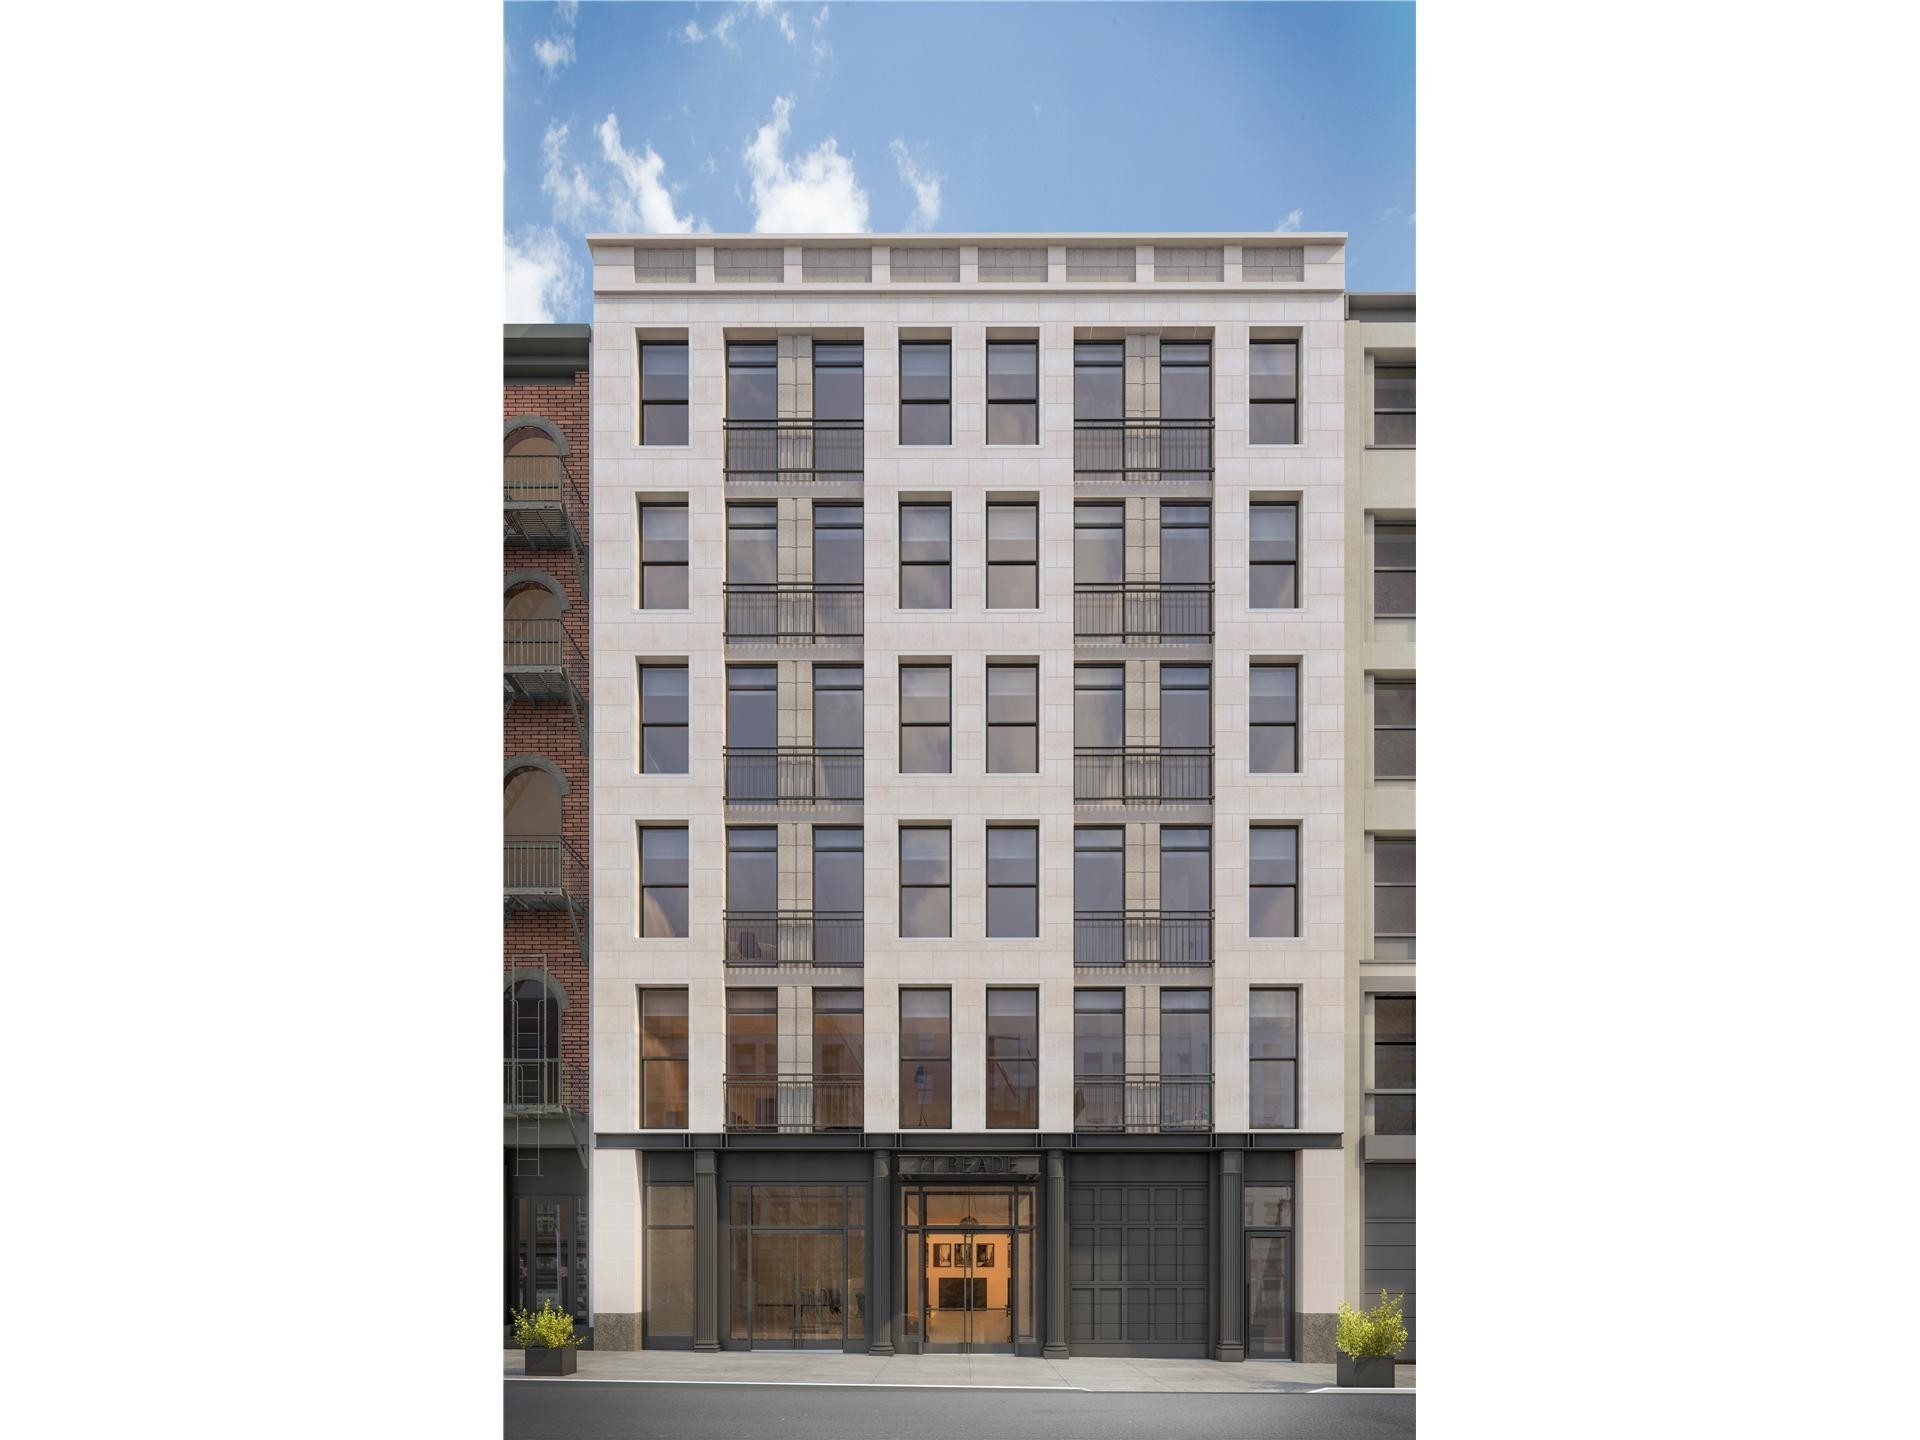 7. Condominiums at Reade Chambers, 71 Reade St, 4A New York